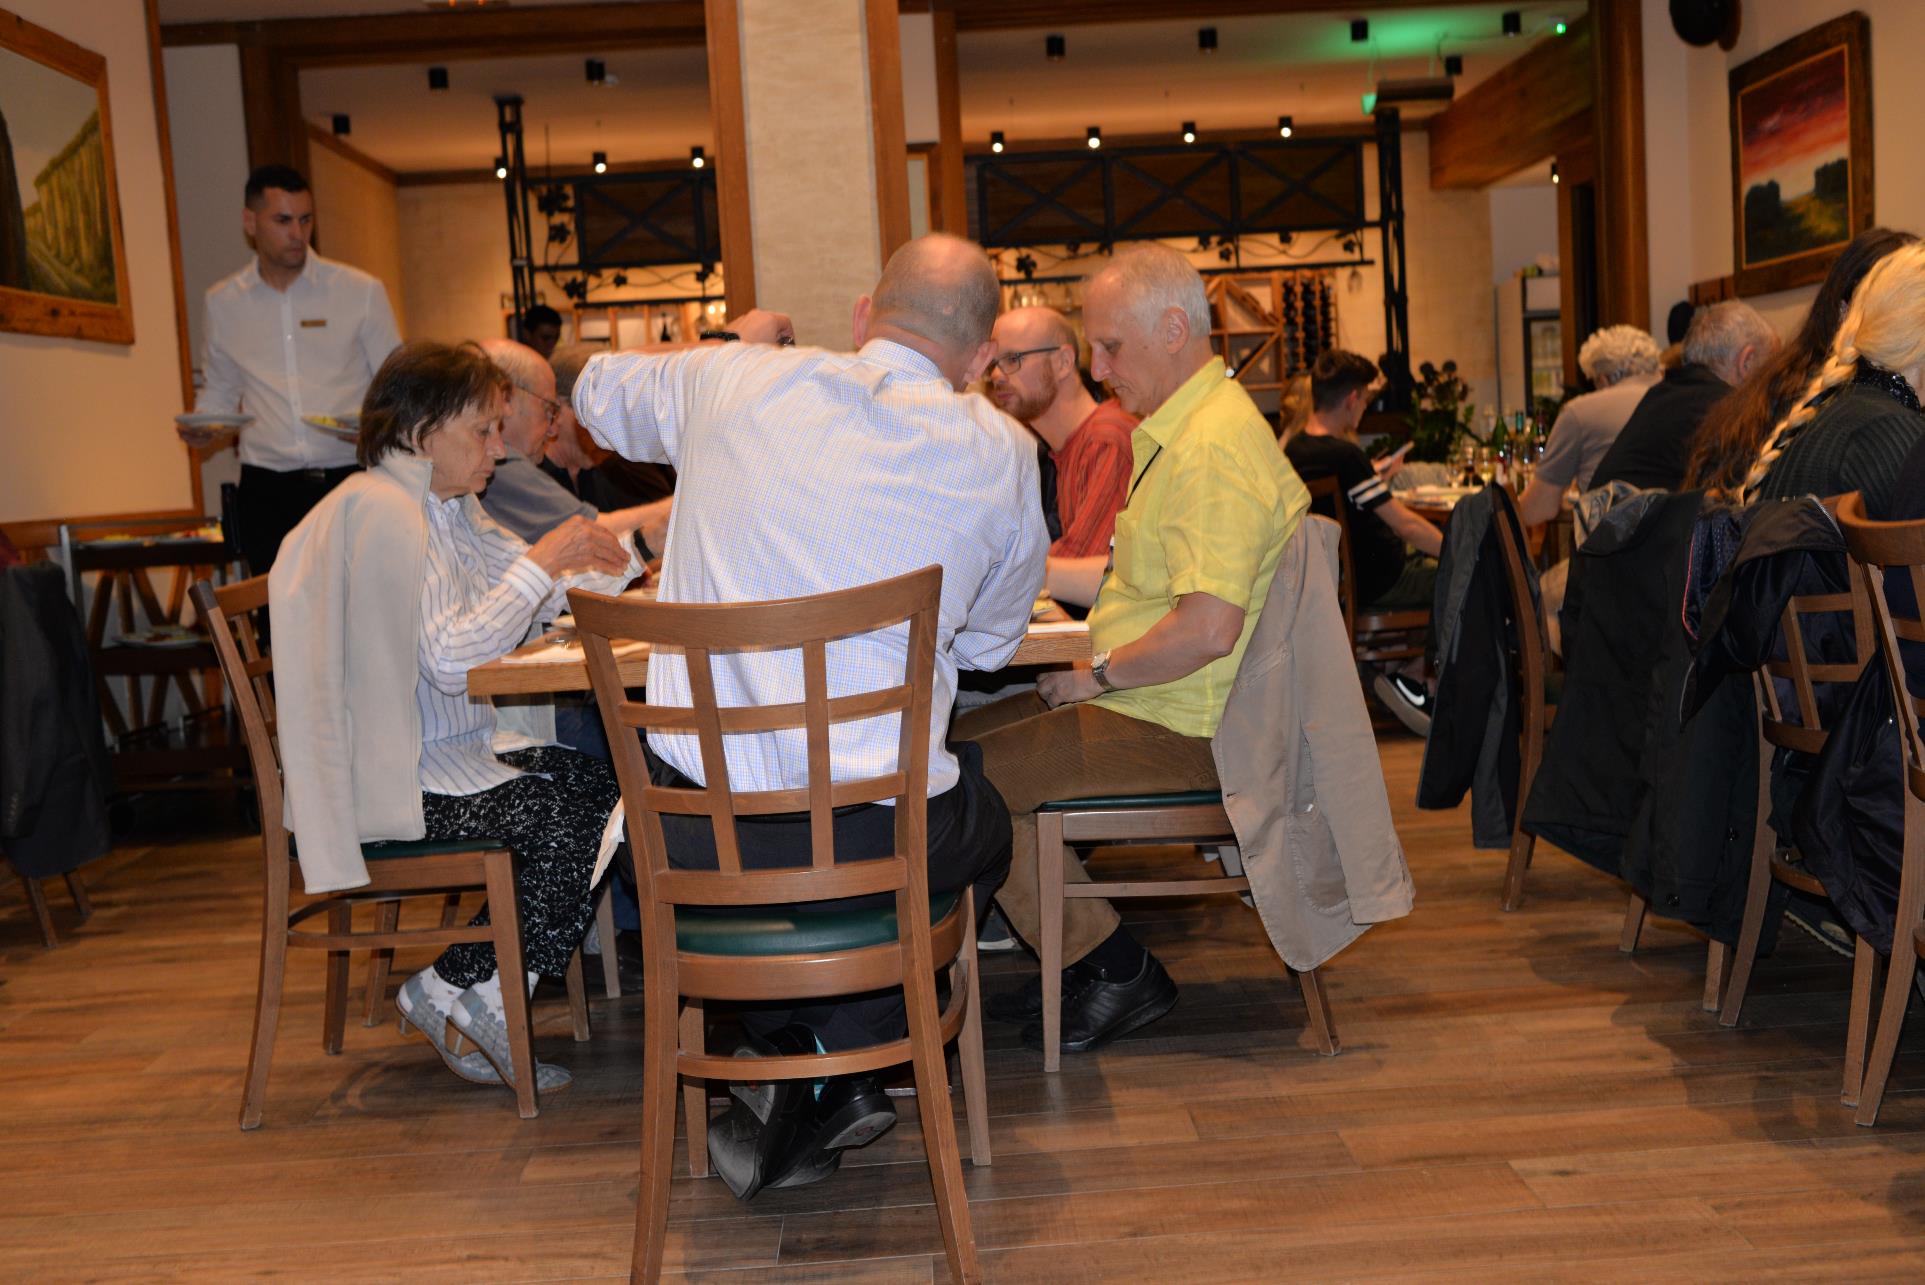 A group of people sitting at a table

Description automatically generated